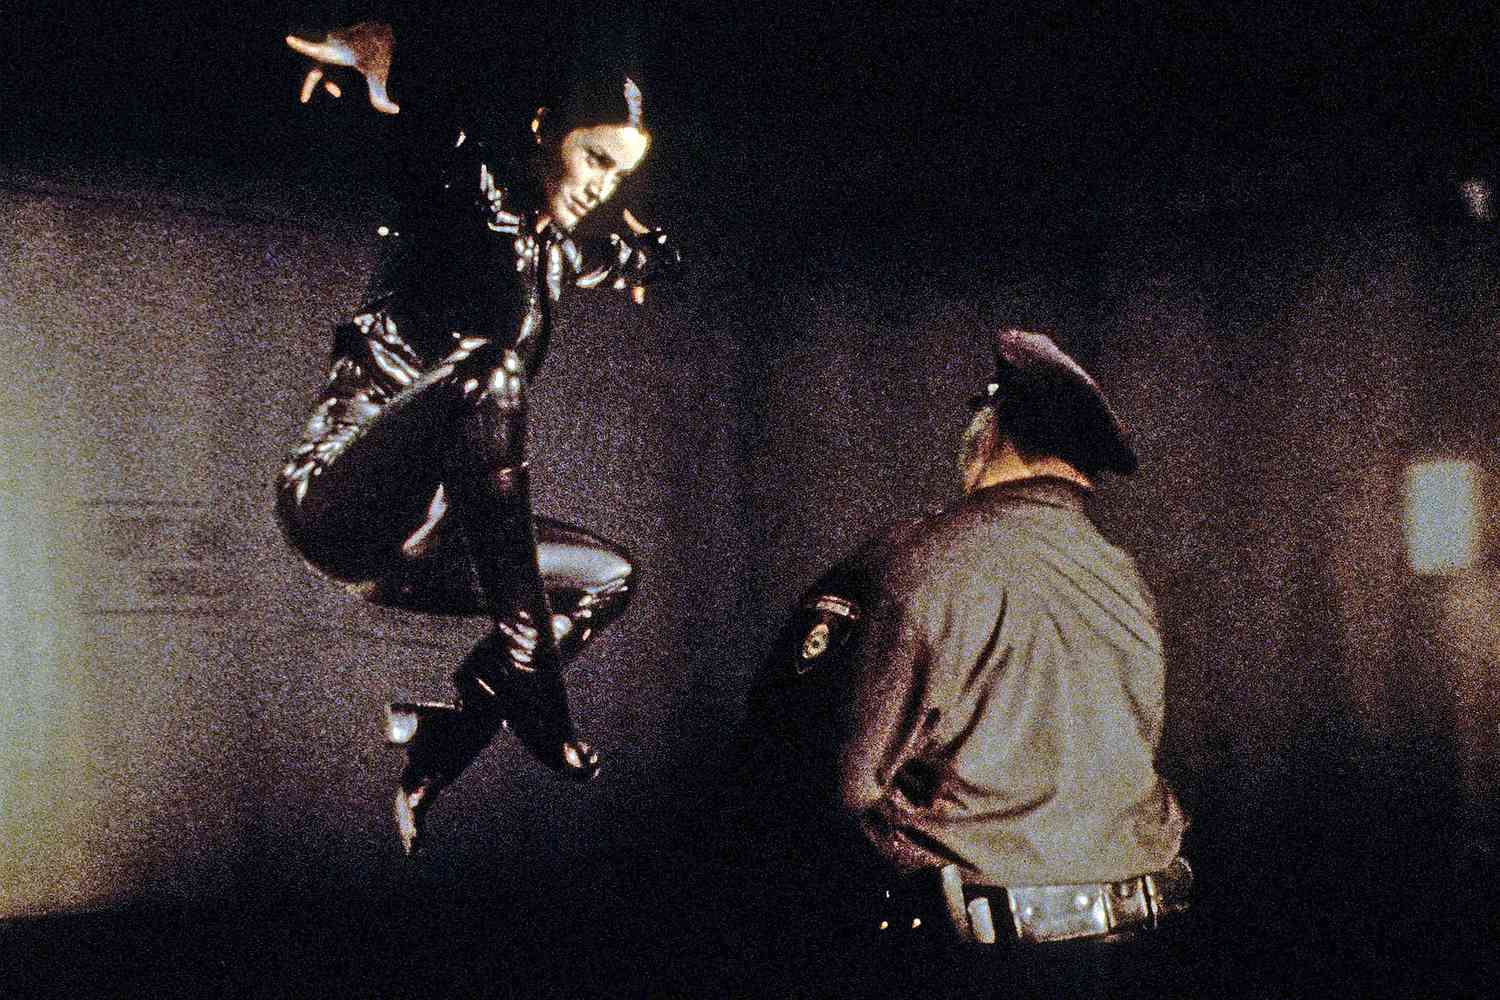 Danny Boyle is directing a dance show based on 'The Matrix'